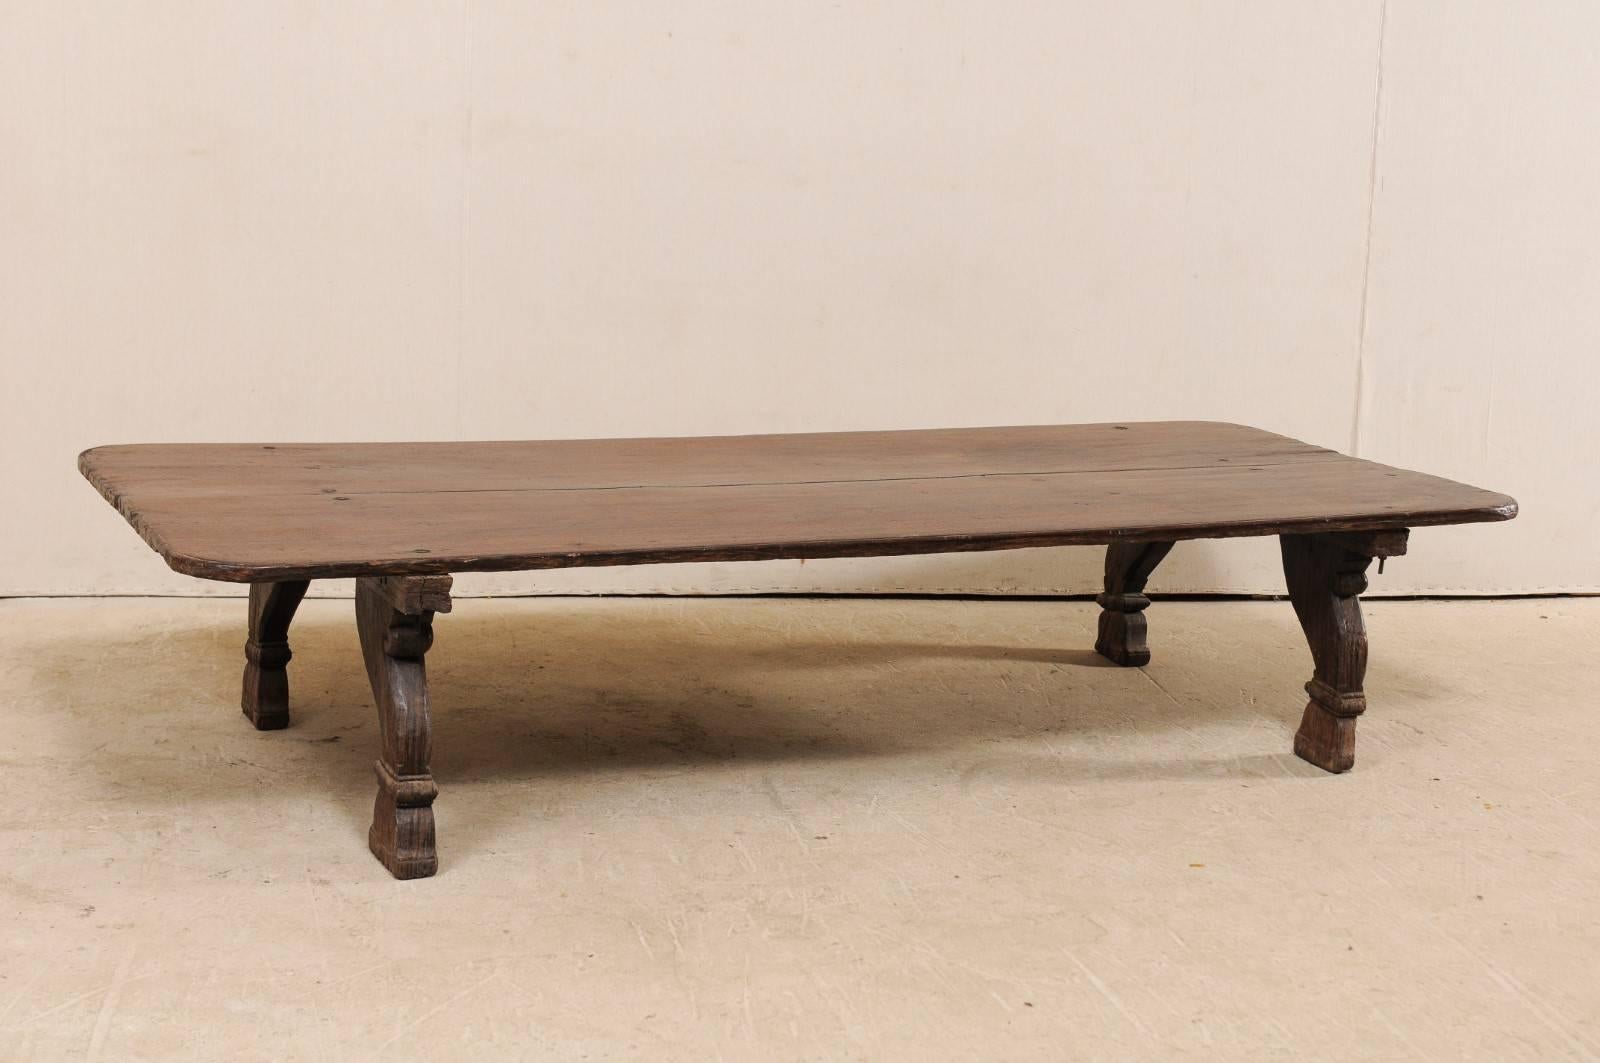 This midcentury British Colonial daybed from India makes for a wonderful modern-use coffee table. This vintage piece features a 7 ft long, rectangular-shaped top with curved edges, resting upon four nicely carved feet at each underside corner. This